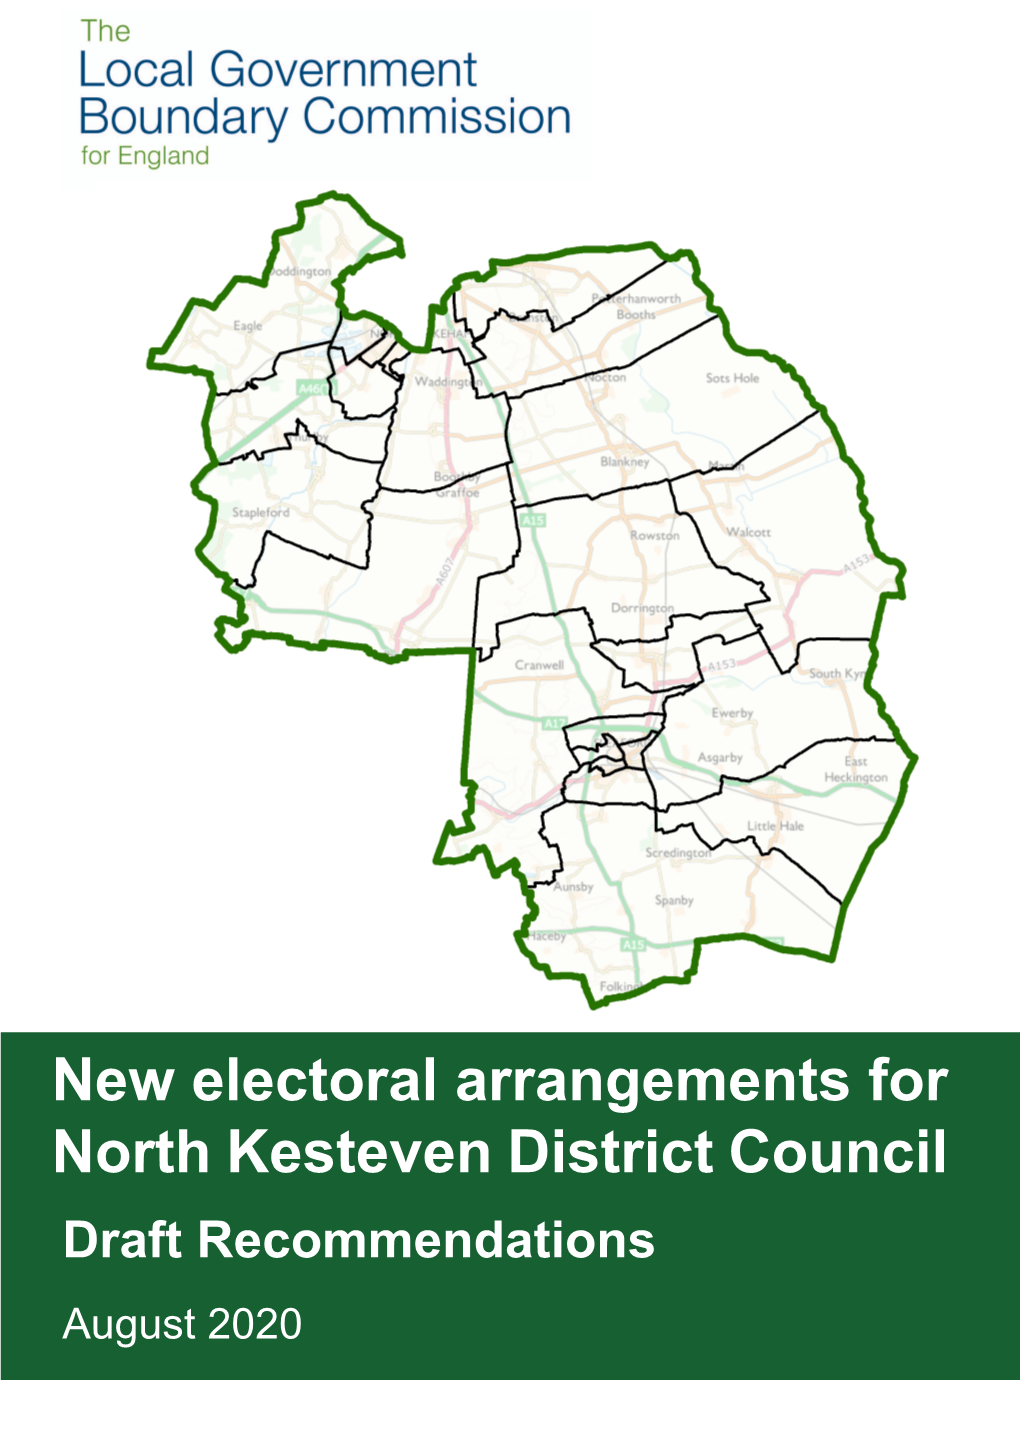 Draft Recommendations Report for North Kesteven District Council